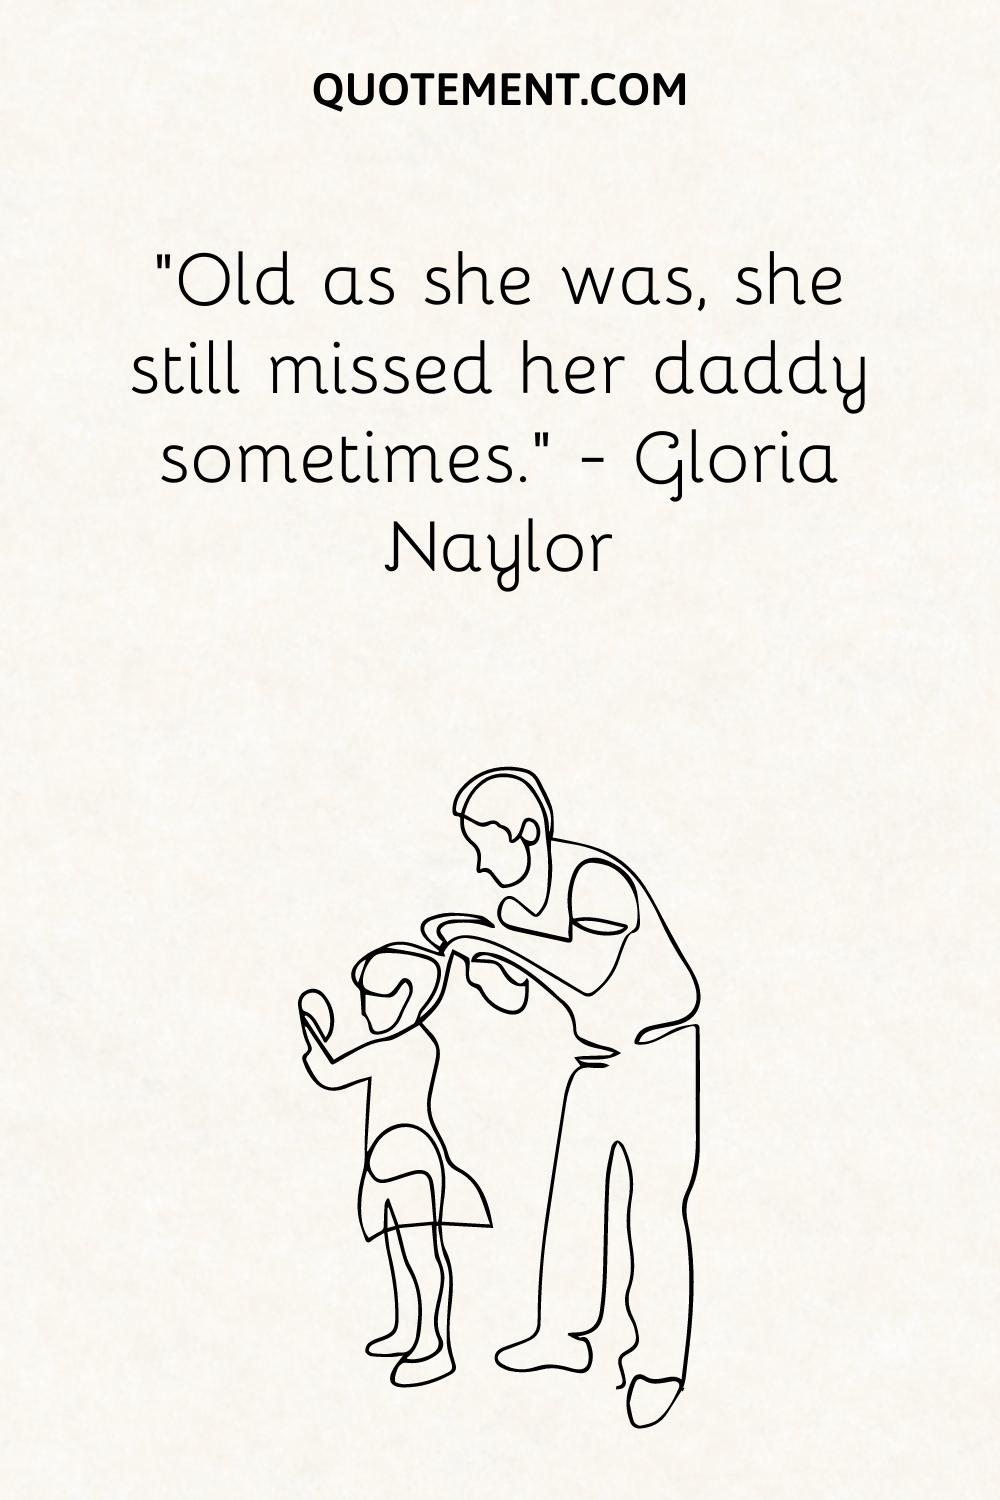 “Old as she was, she still missed her daddy sometimes.” — Gloria Naylor